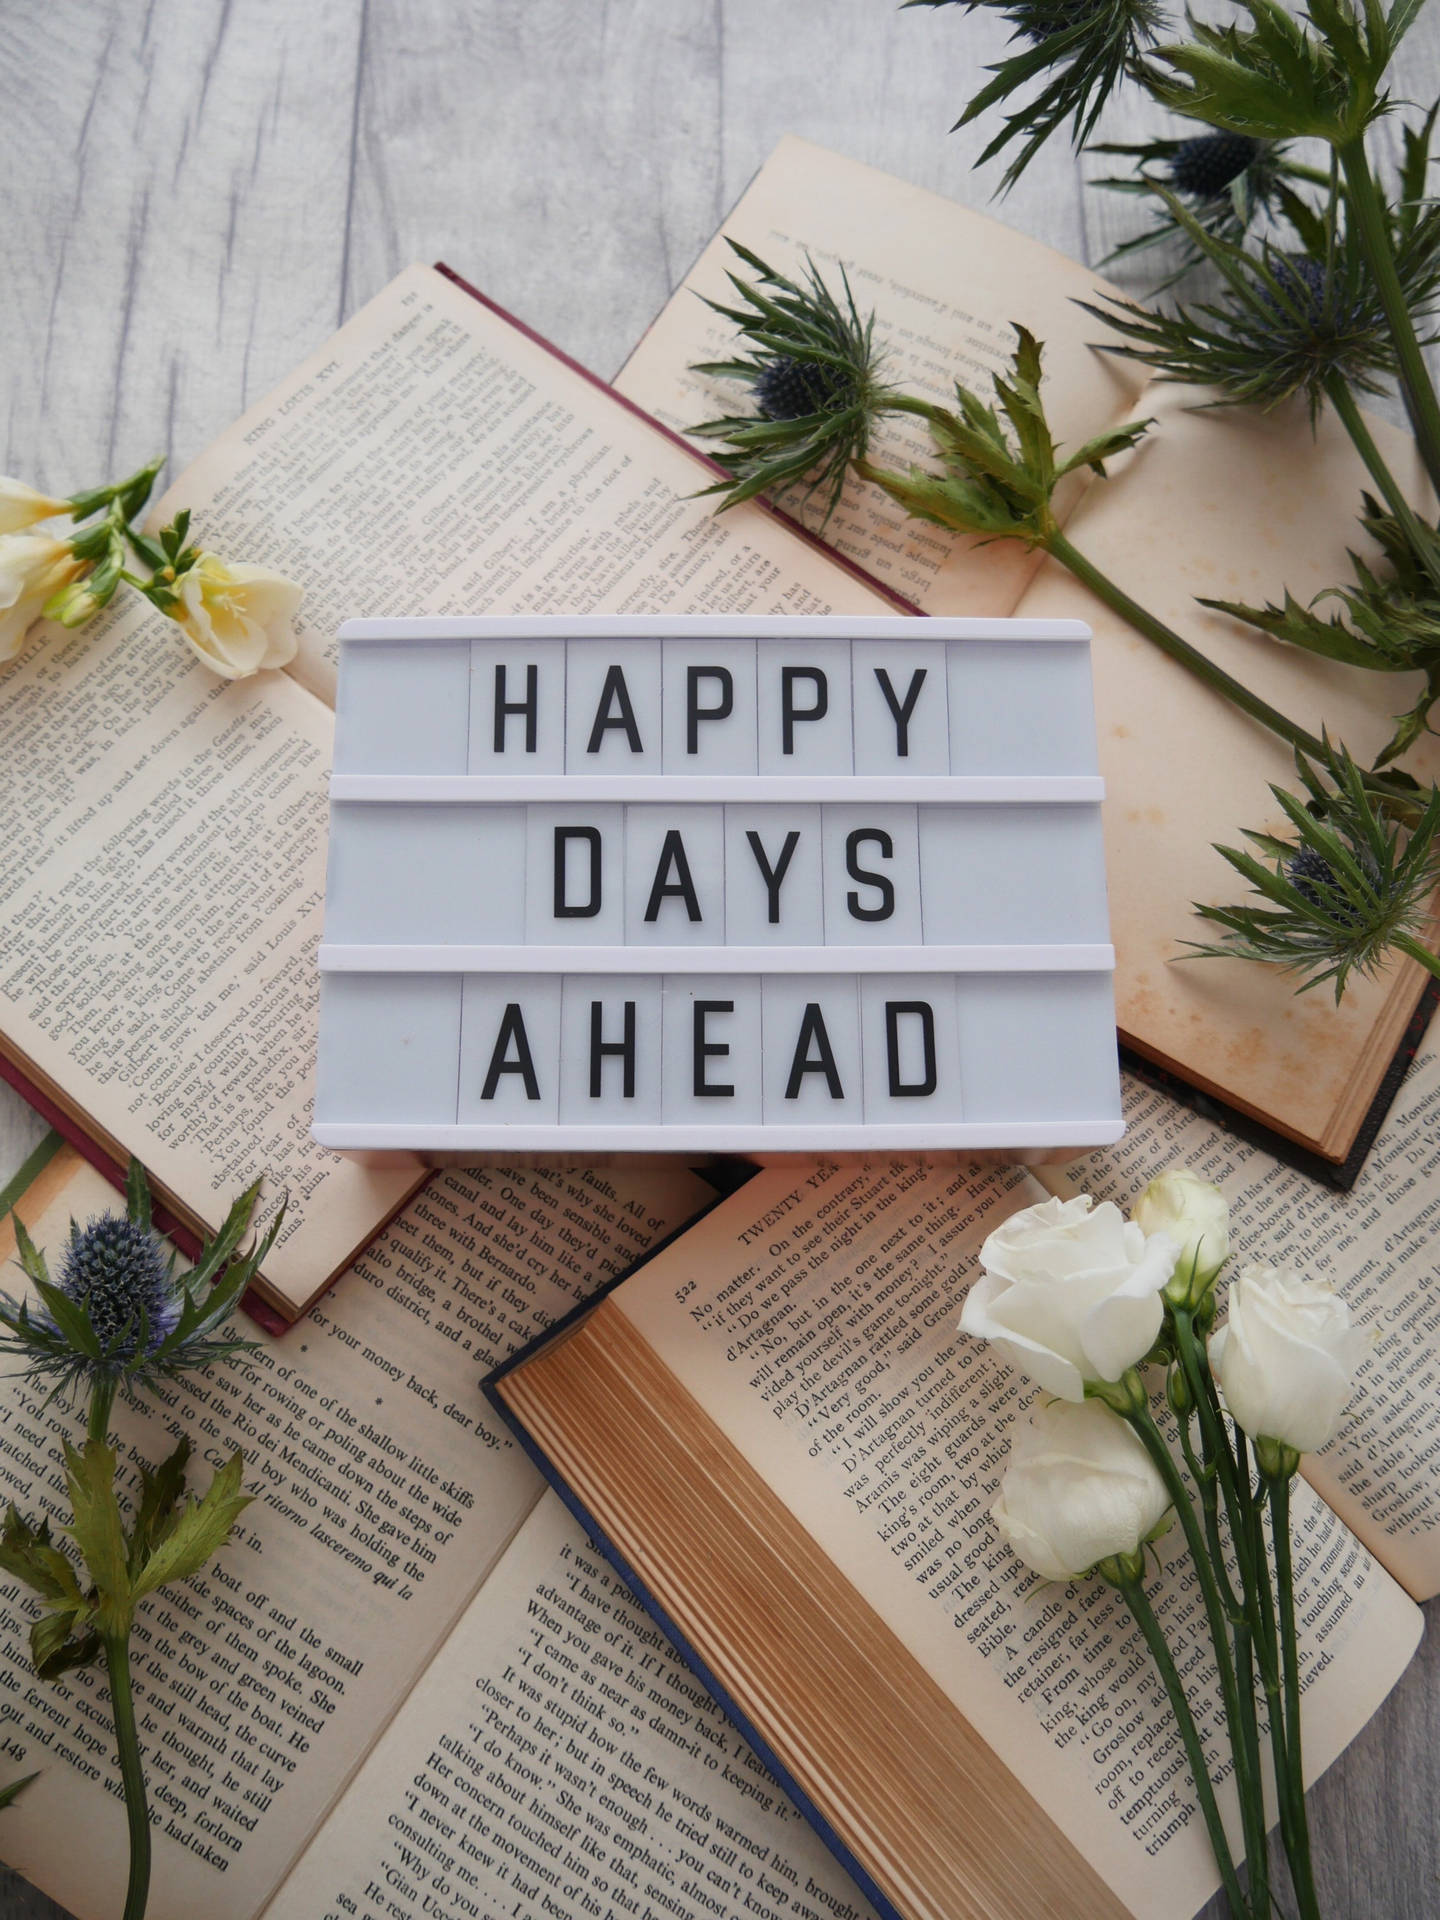 Happy Days Ahead Inspirational Quote Background